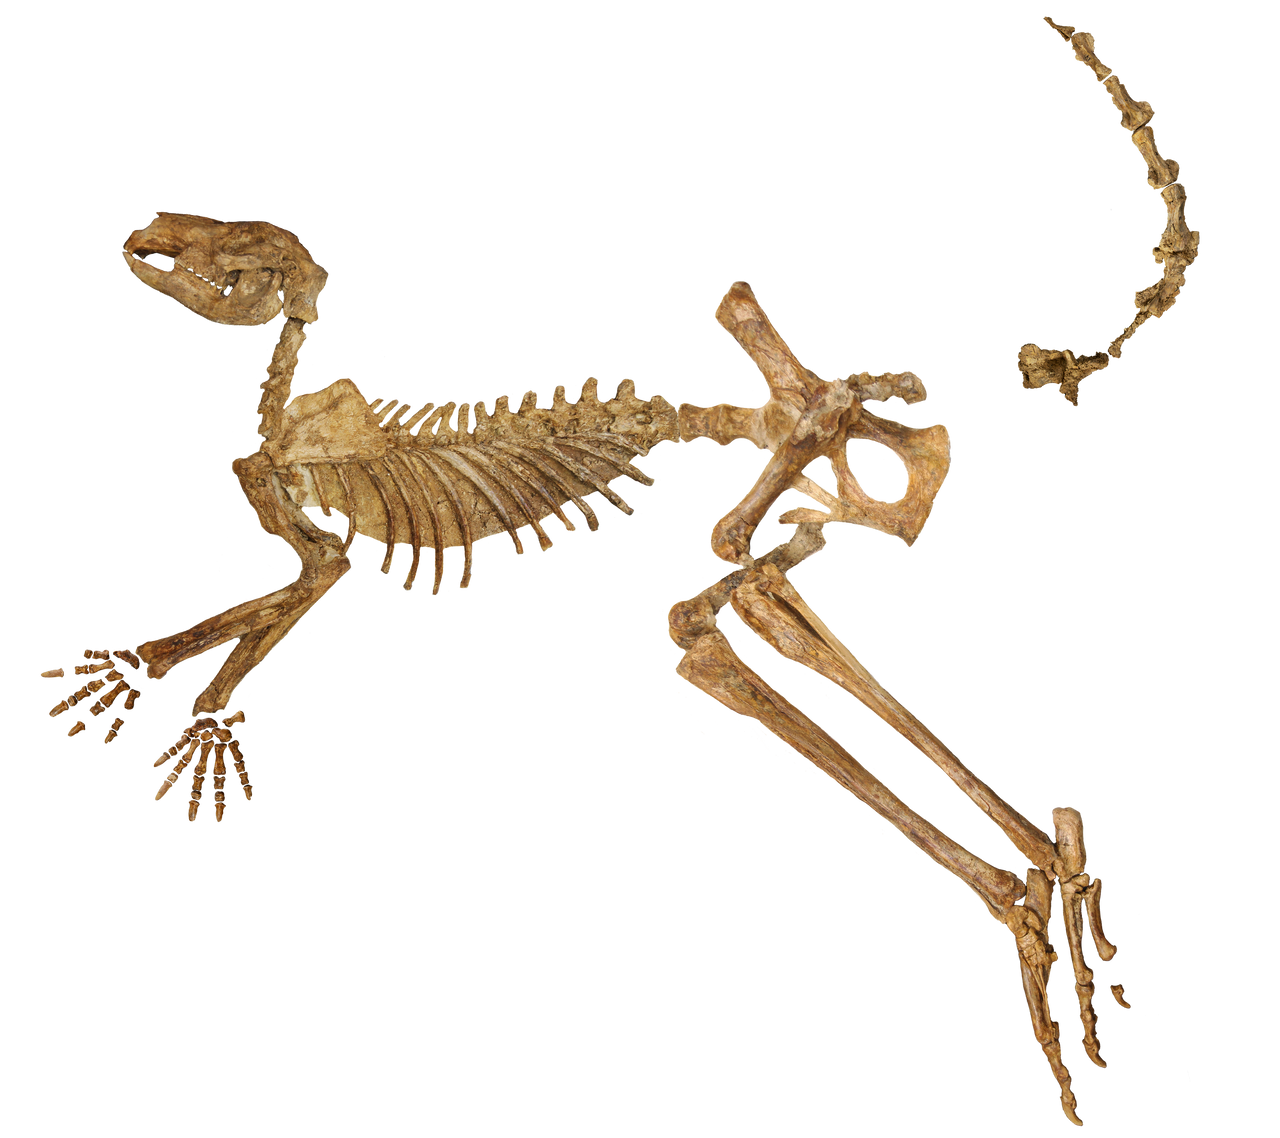 A near-complete fossil skeleton of <em>Protemnodon viator</em> from Lake Callabonna, missing just a few bones from the hand, foot, and tail.